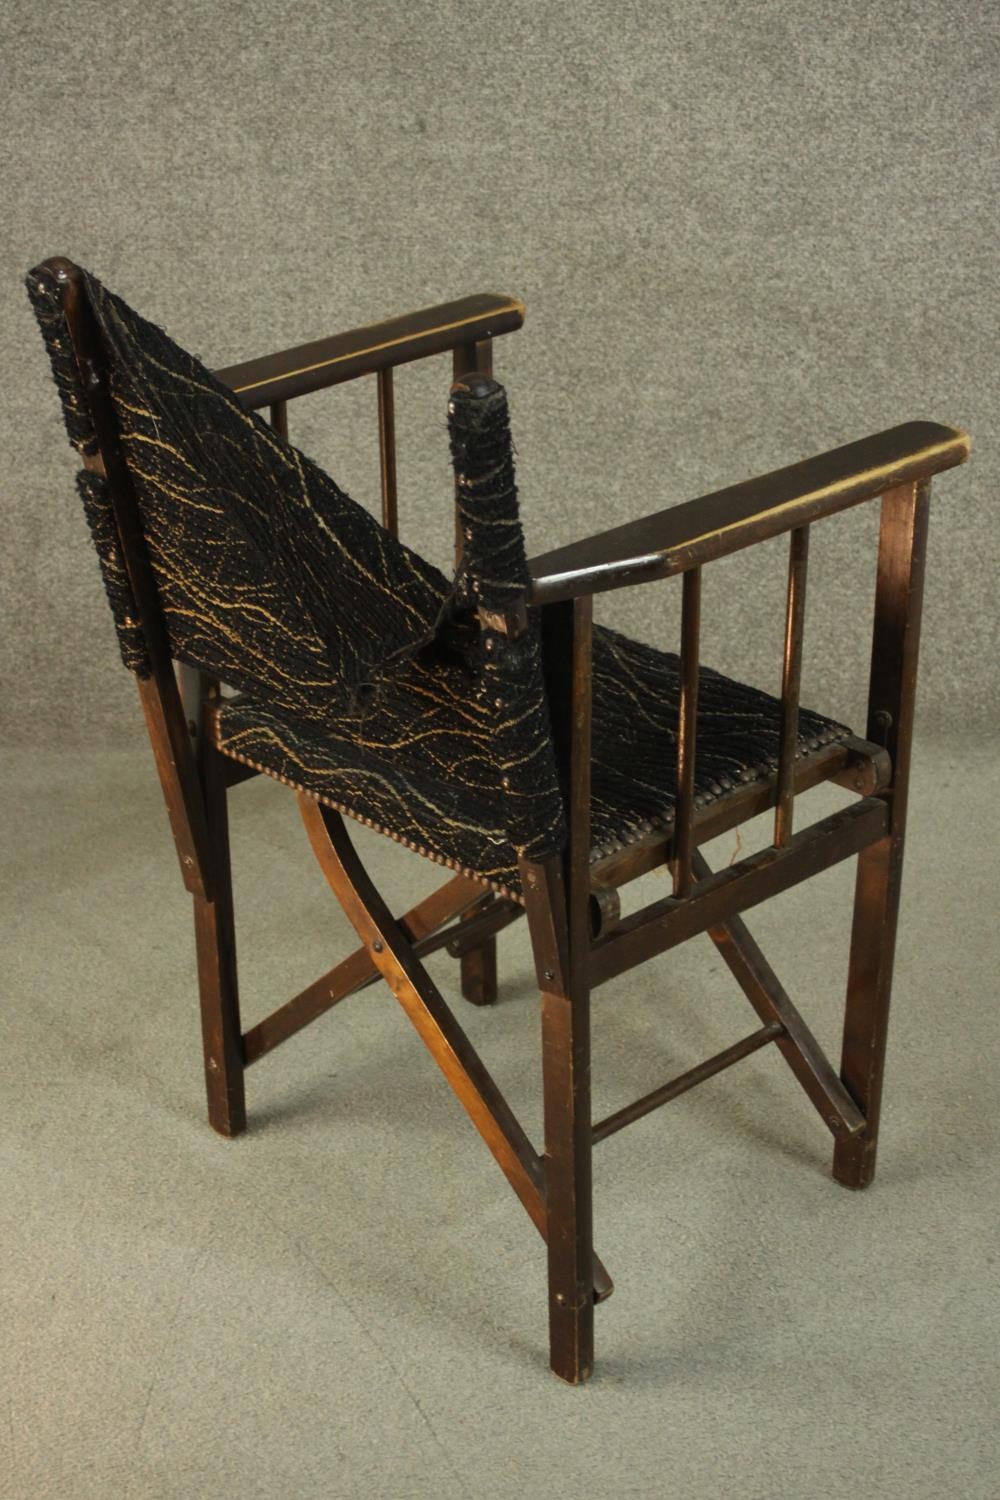 A 20th century 'Firma' folding campaign chair, upholstered in black fabric (damaged), made at the - Image 4 of 8